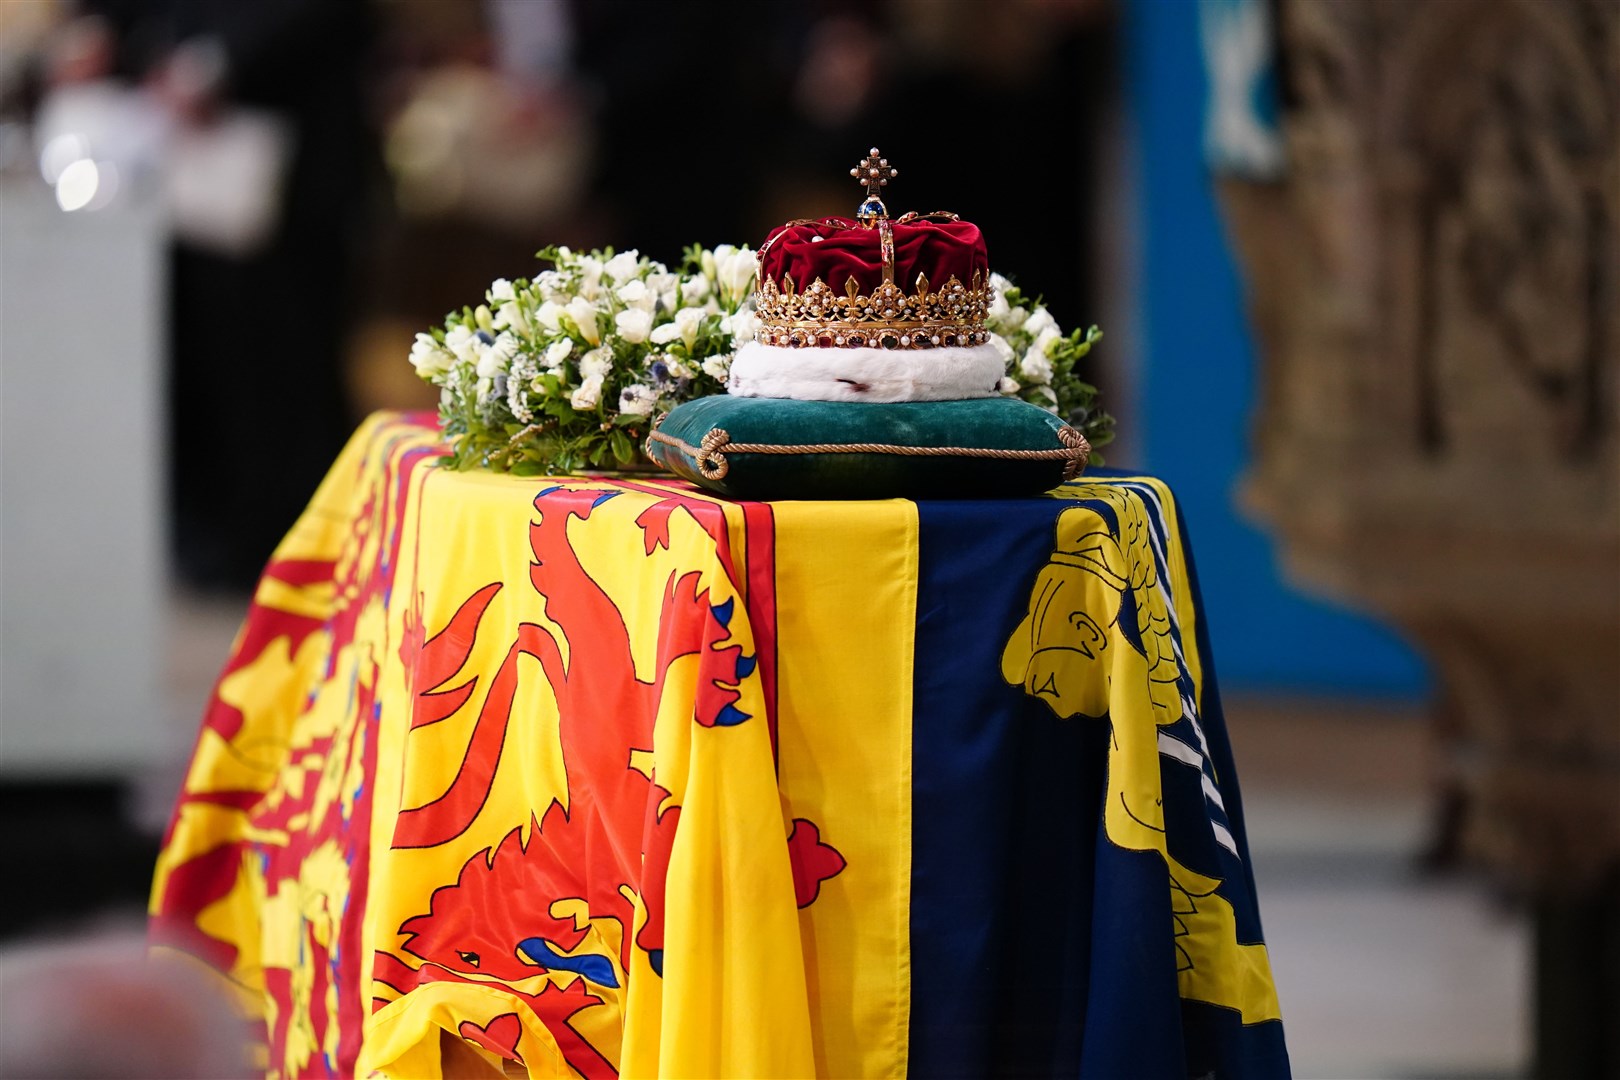 The Crown of Scotland sits atop the coffin of Queen Elizabeth II during a Service of Prayer and Reflection for her life at St Giles’ Cathedral, Edinburgh (Jane Barlow/PA)